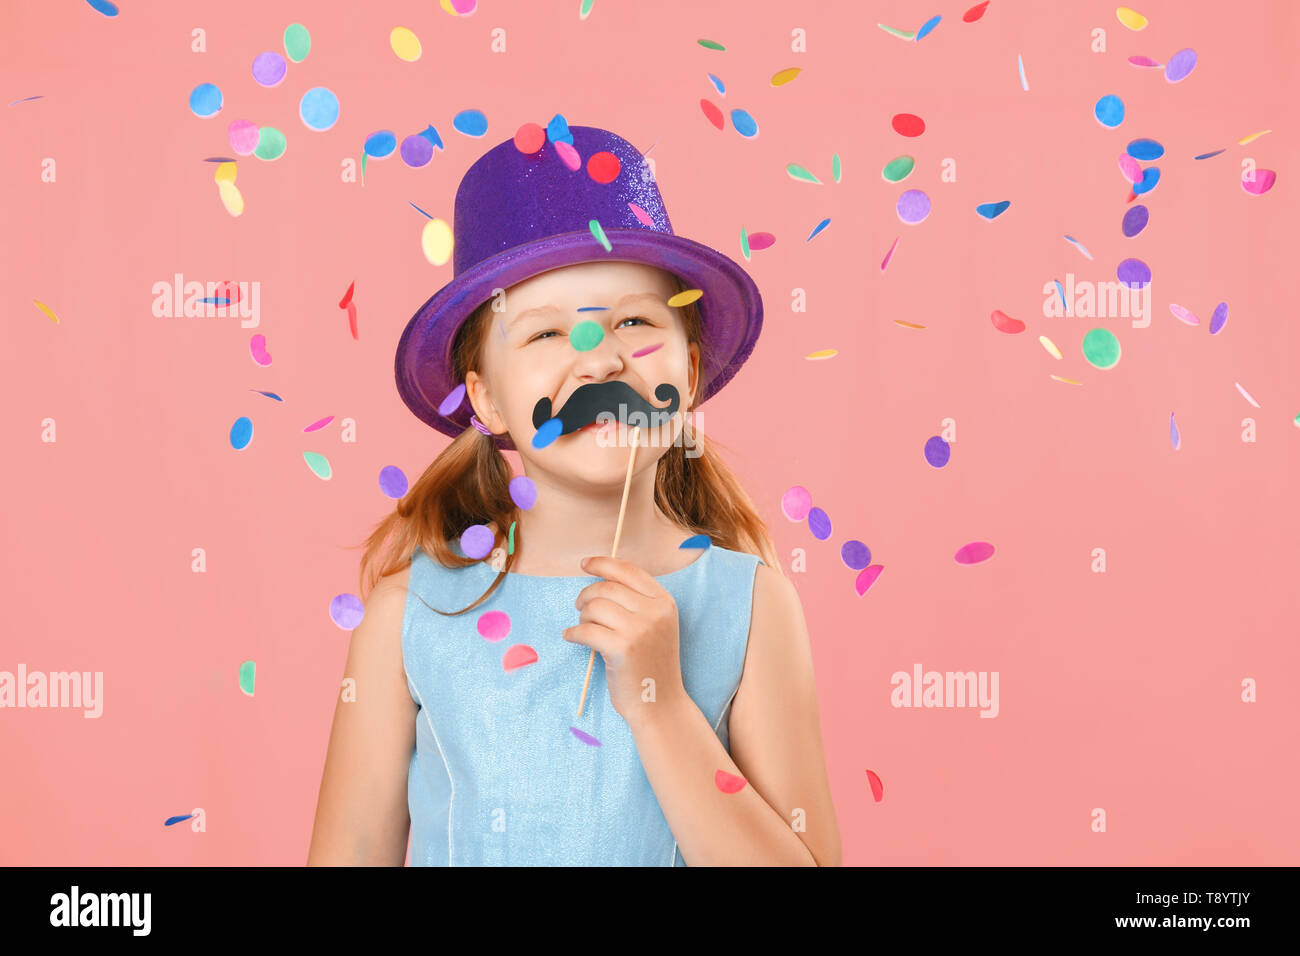 Happy father's day. Funny little girl with fake mustache and wearing a hat under falling confetti on a pink background. Family concept Stock Photo